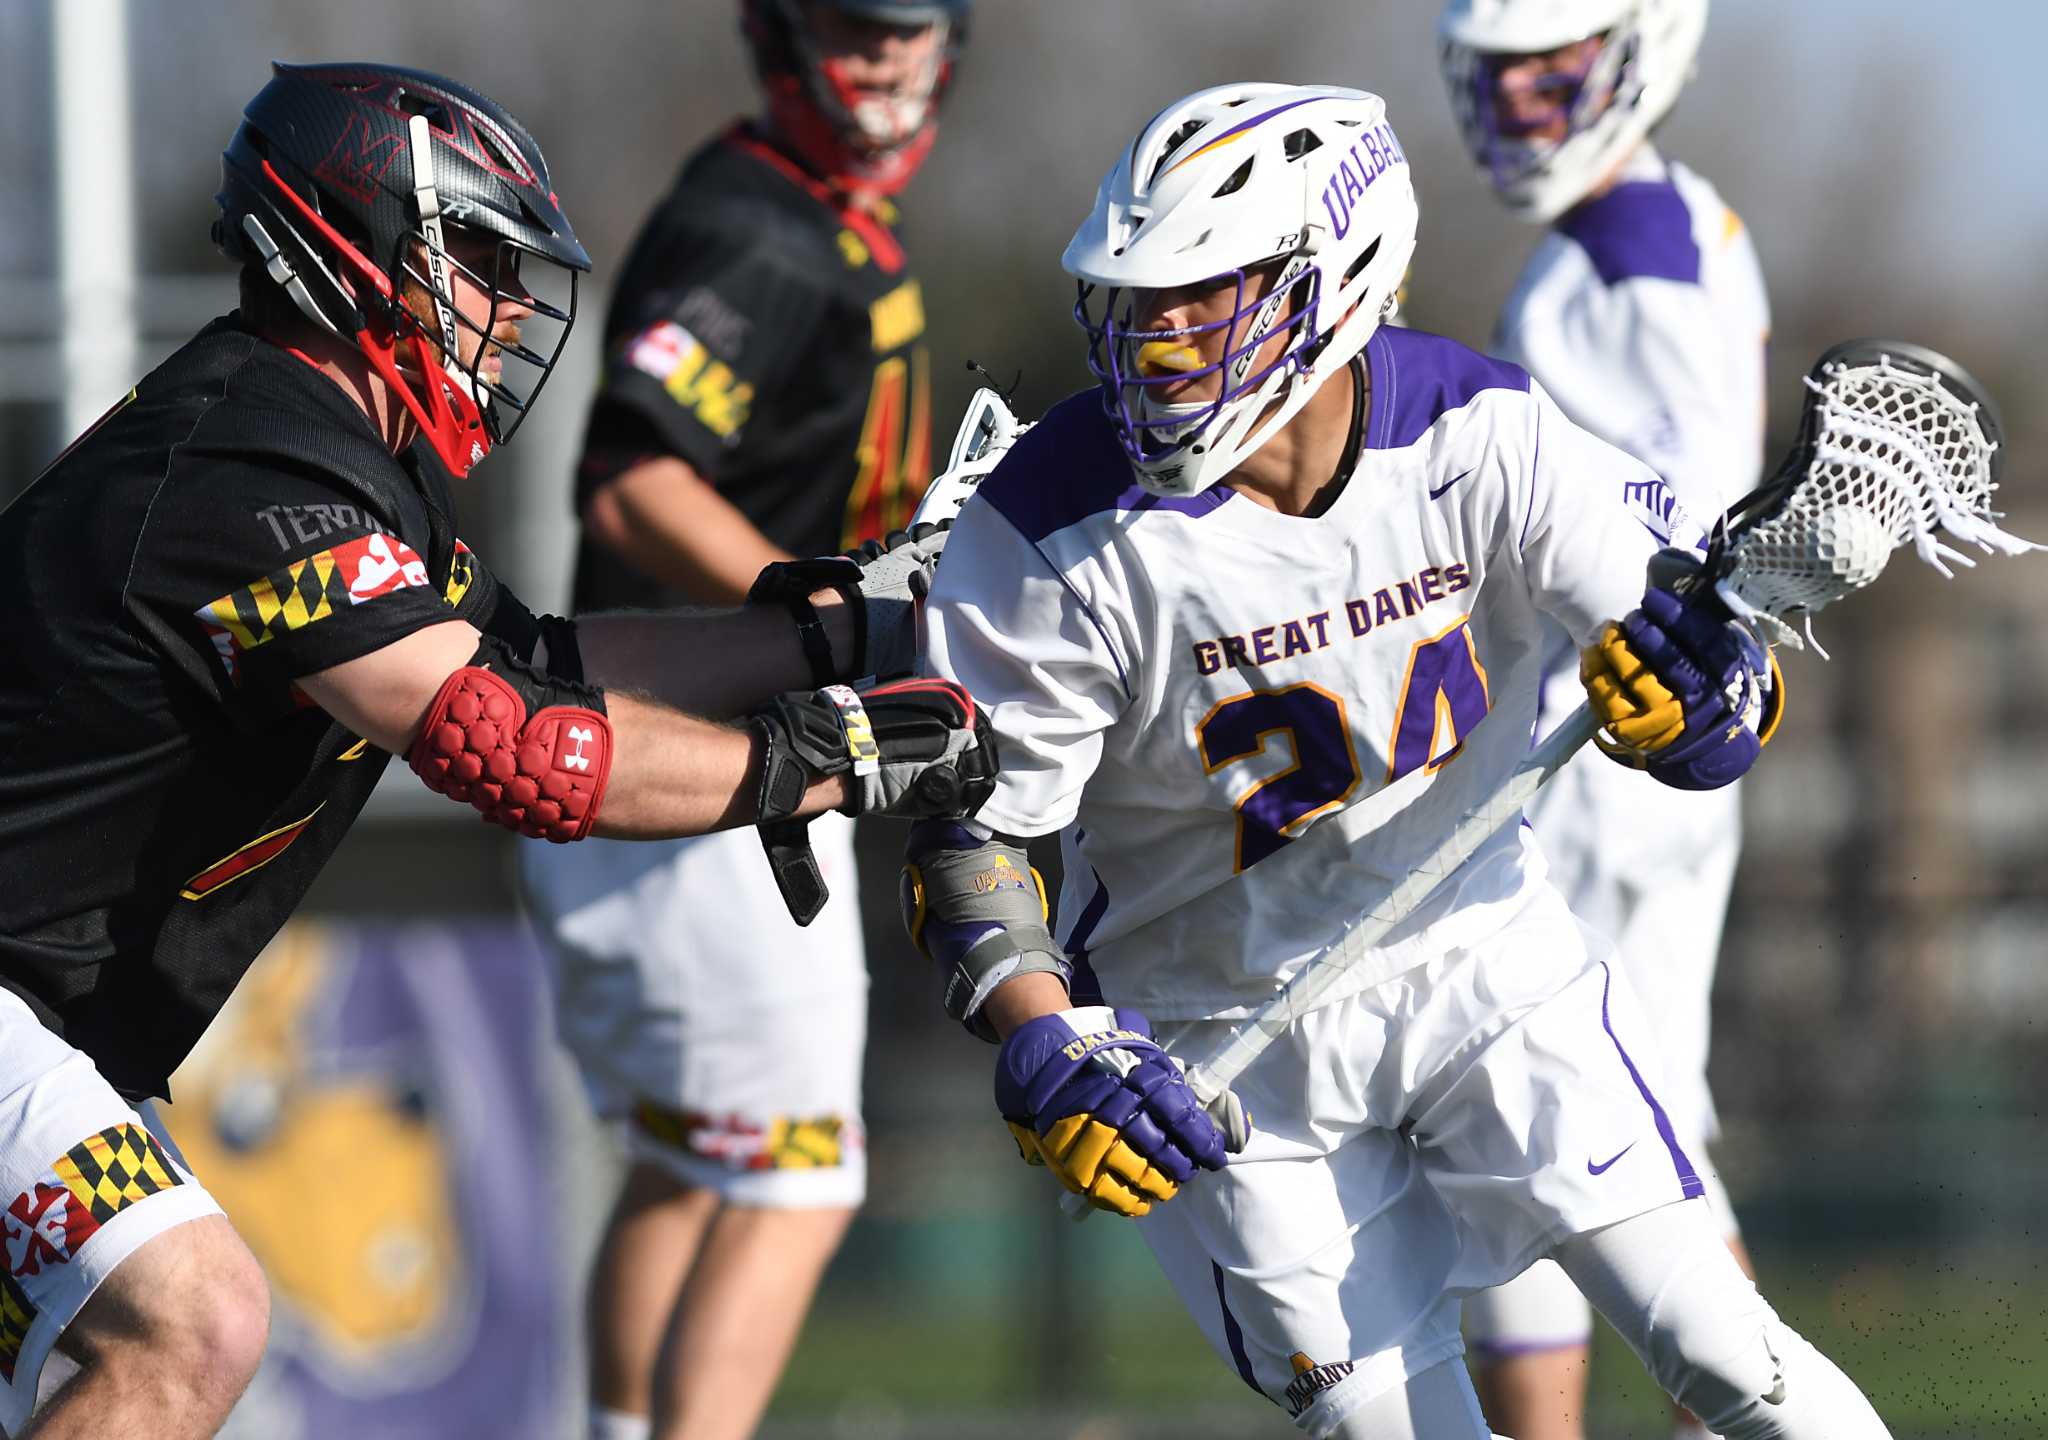 UAlbany lacrosse embraces sport's Native American roots